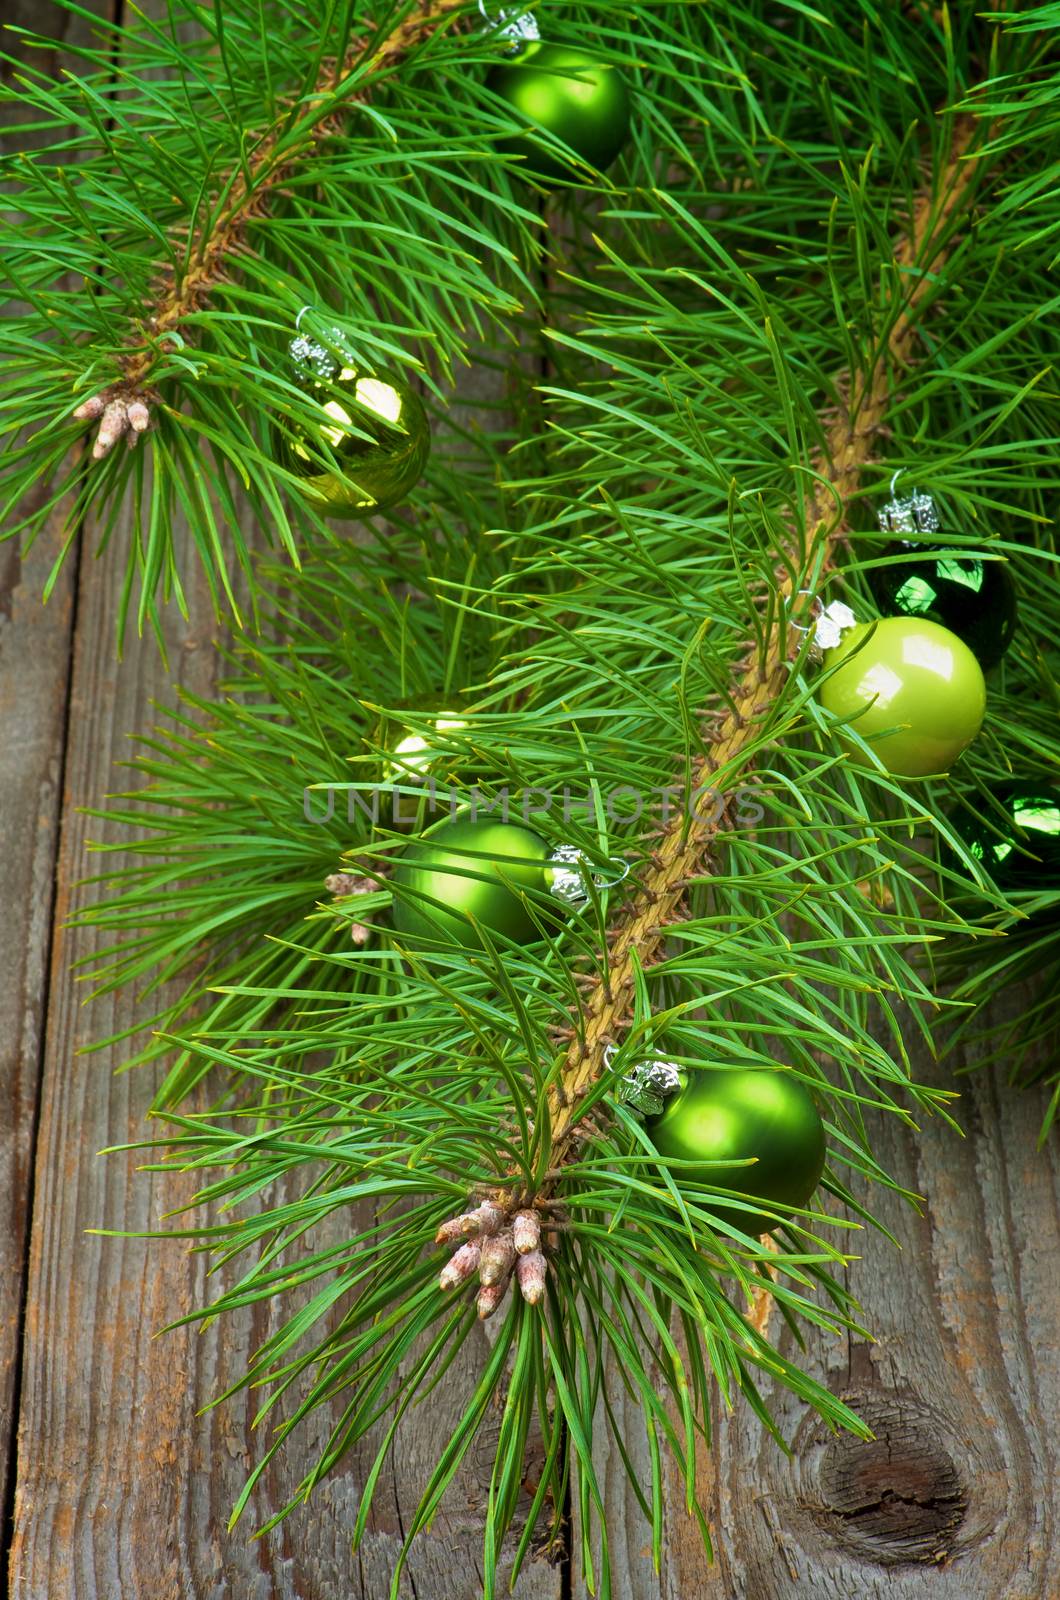 Christmas Decoration with Small Green Baubles into Fluffy Green Pine Branches with Long Needles closeup on Rustic Wooden background